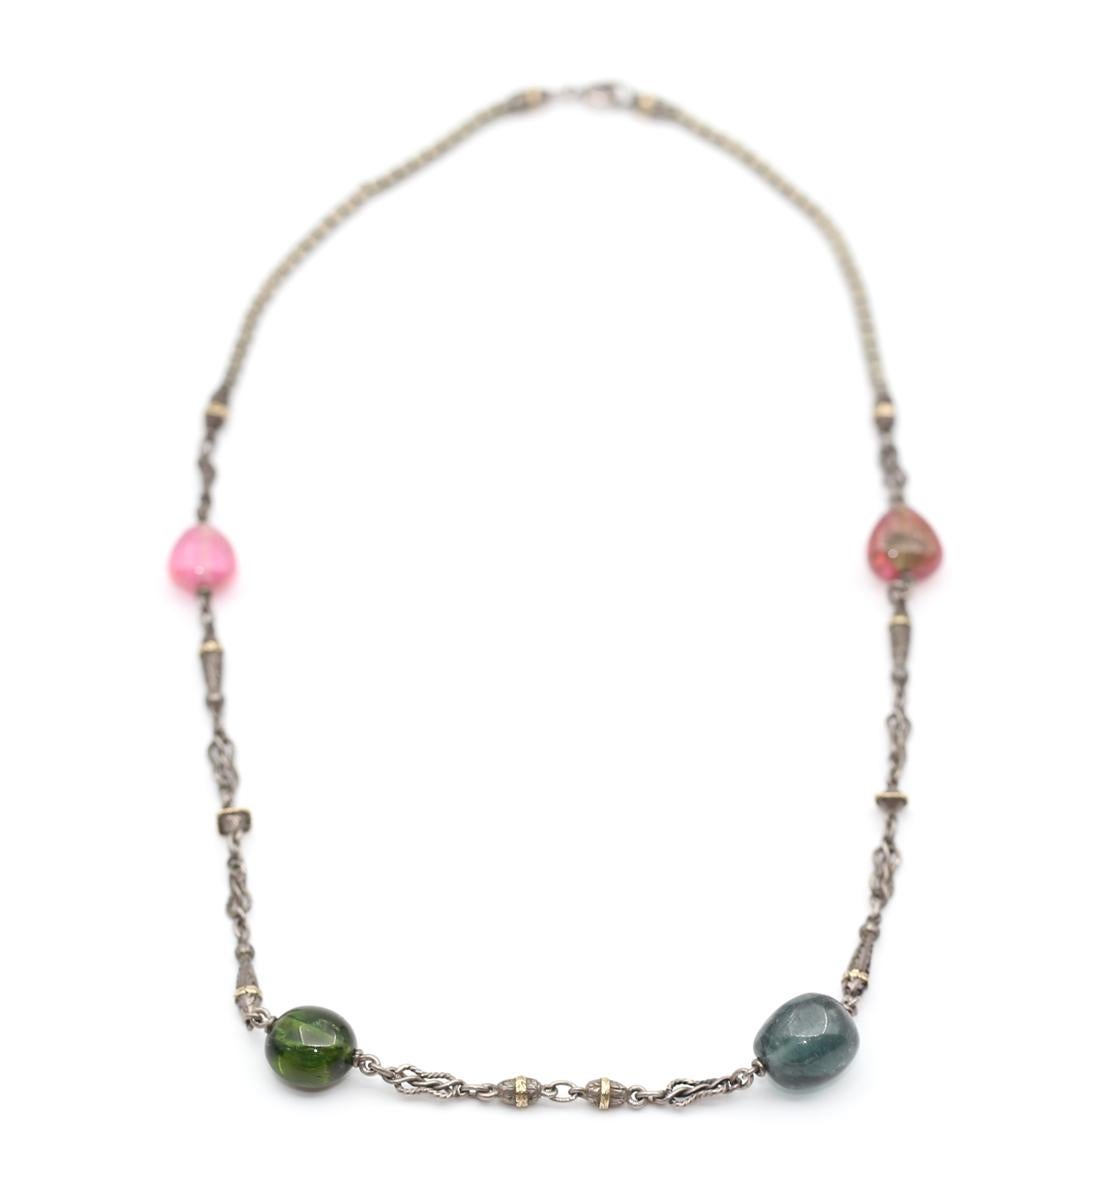 Tourmaline Beads Silver and Gold Necklace, 1960 
Tourmaline Beads Silver and Gold Necklace. 
Created around 1960.
Simple and fine item yet the quality of the jeweler's work is outstanding. There are so many details in the links and beads. 

The